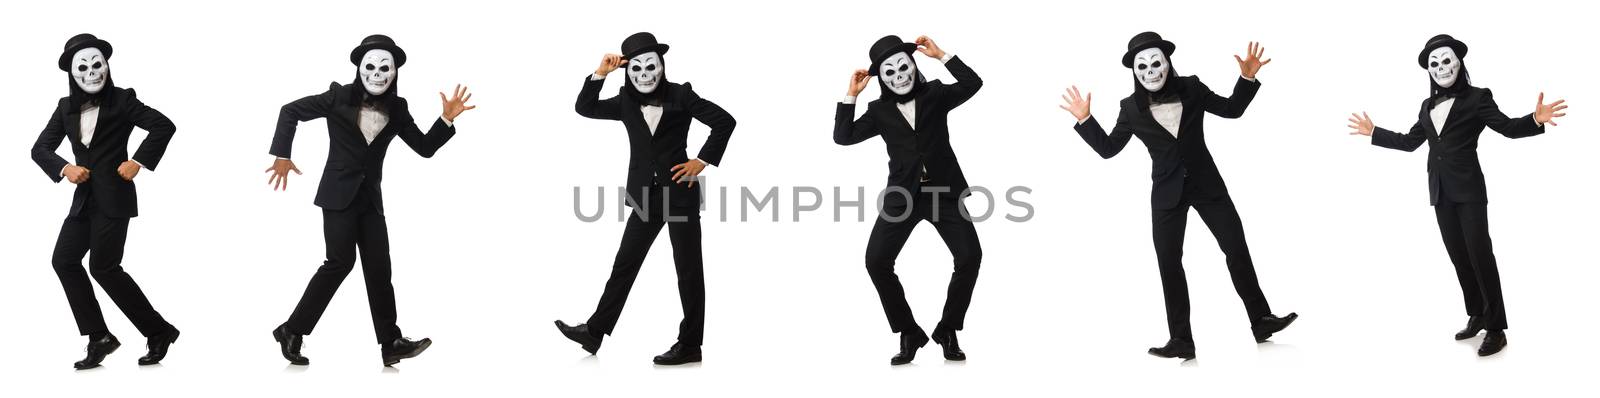 Man with scary mask isolated on white by Elnur